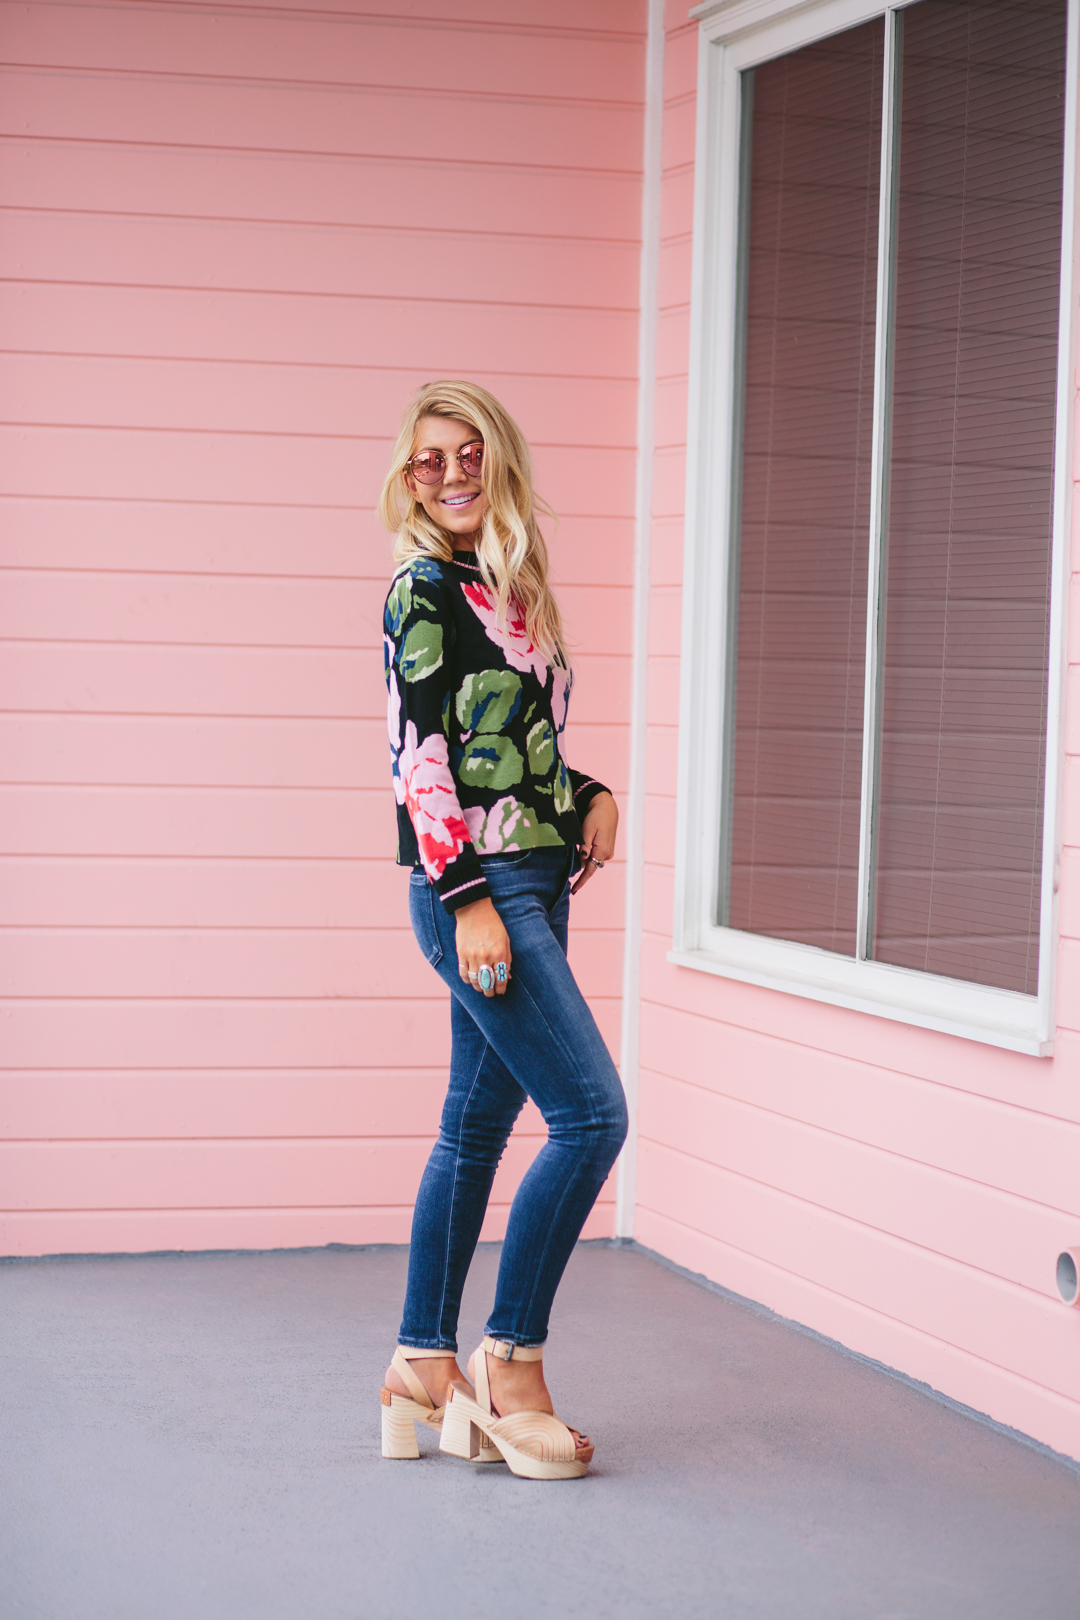 Lisa Allen of Lucnhpails and Lipstick wearing a floral Anthro sweater, jeans and free people clogs